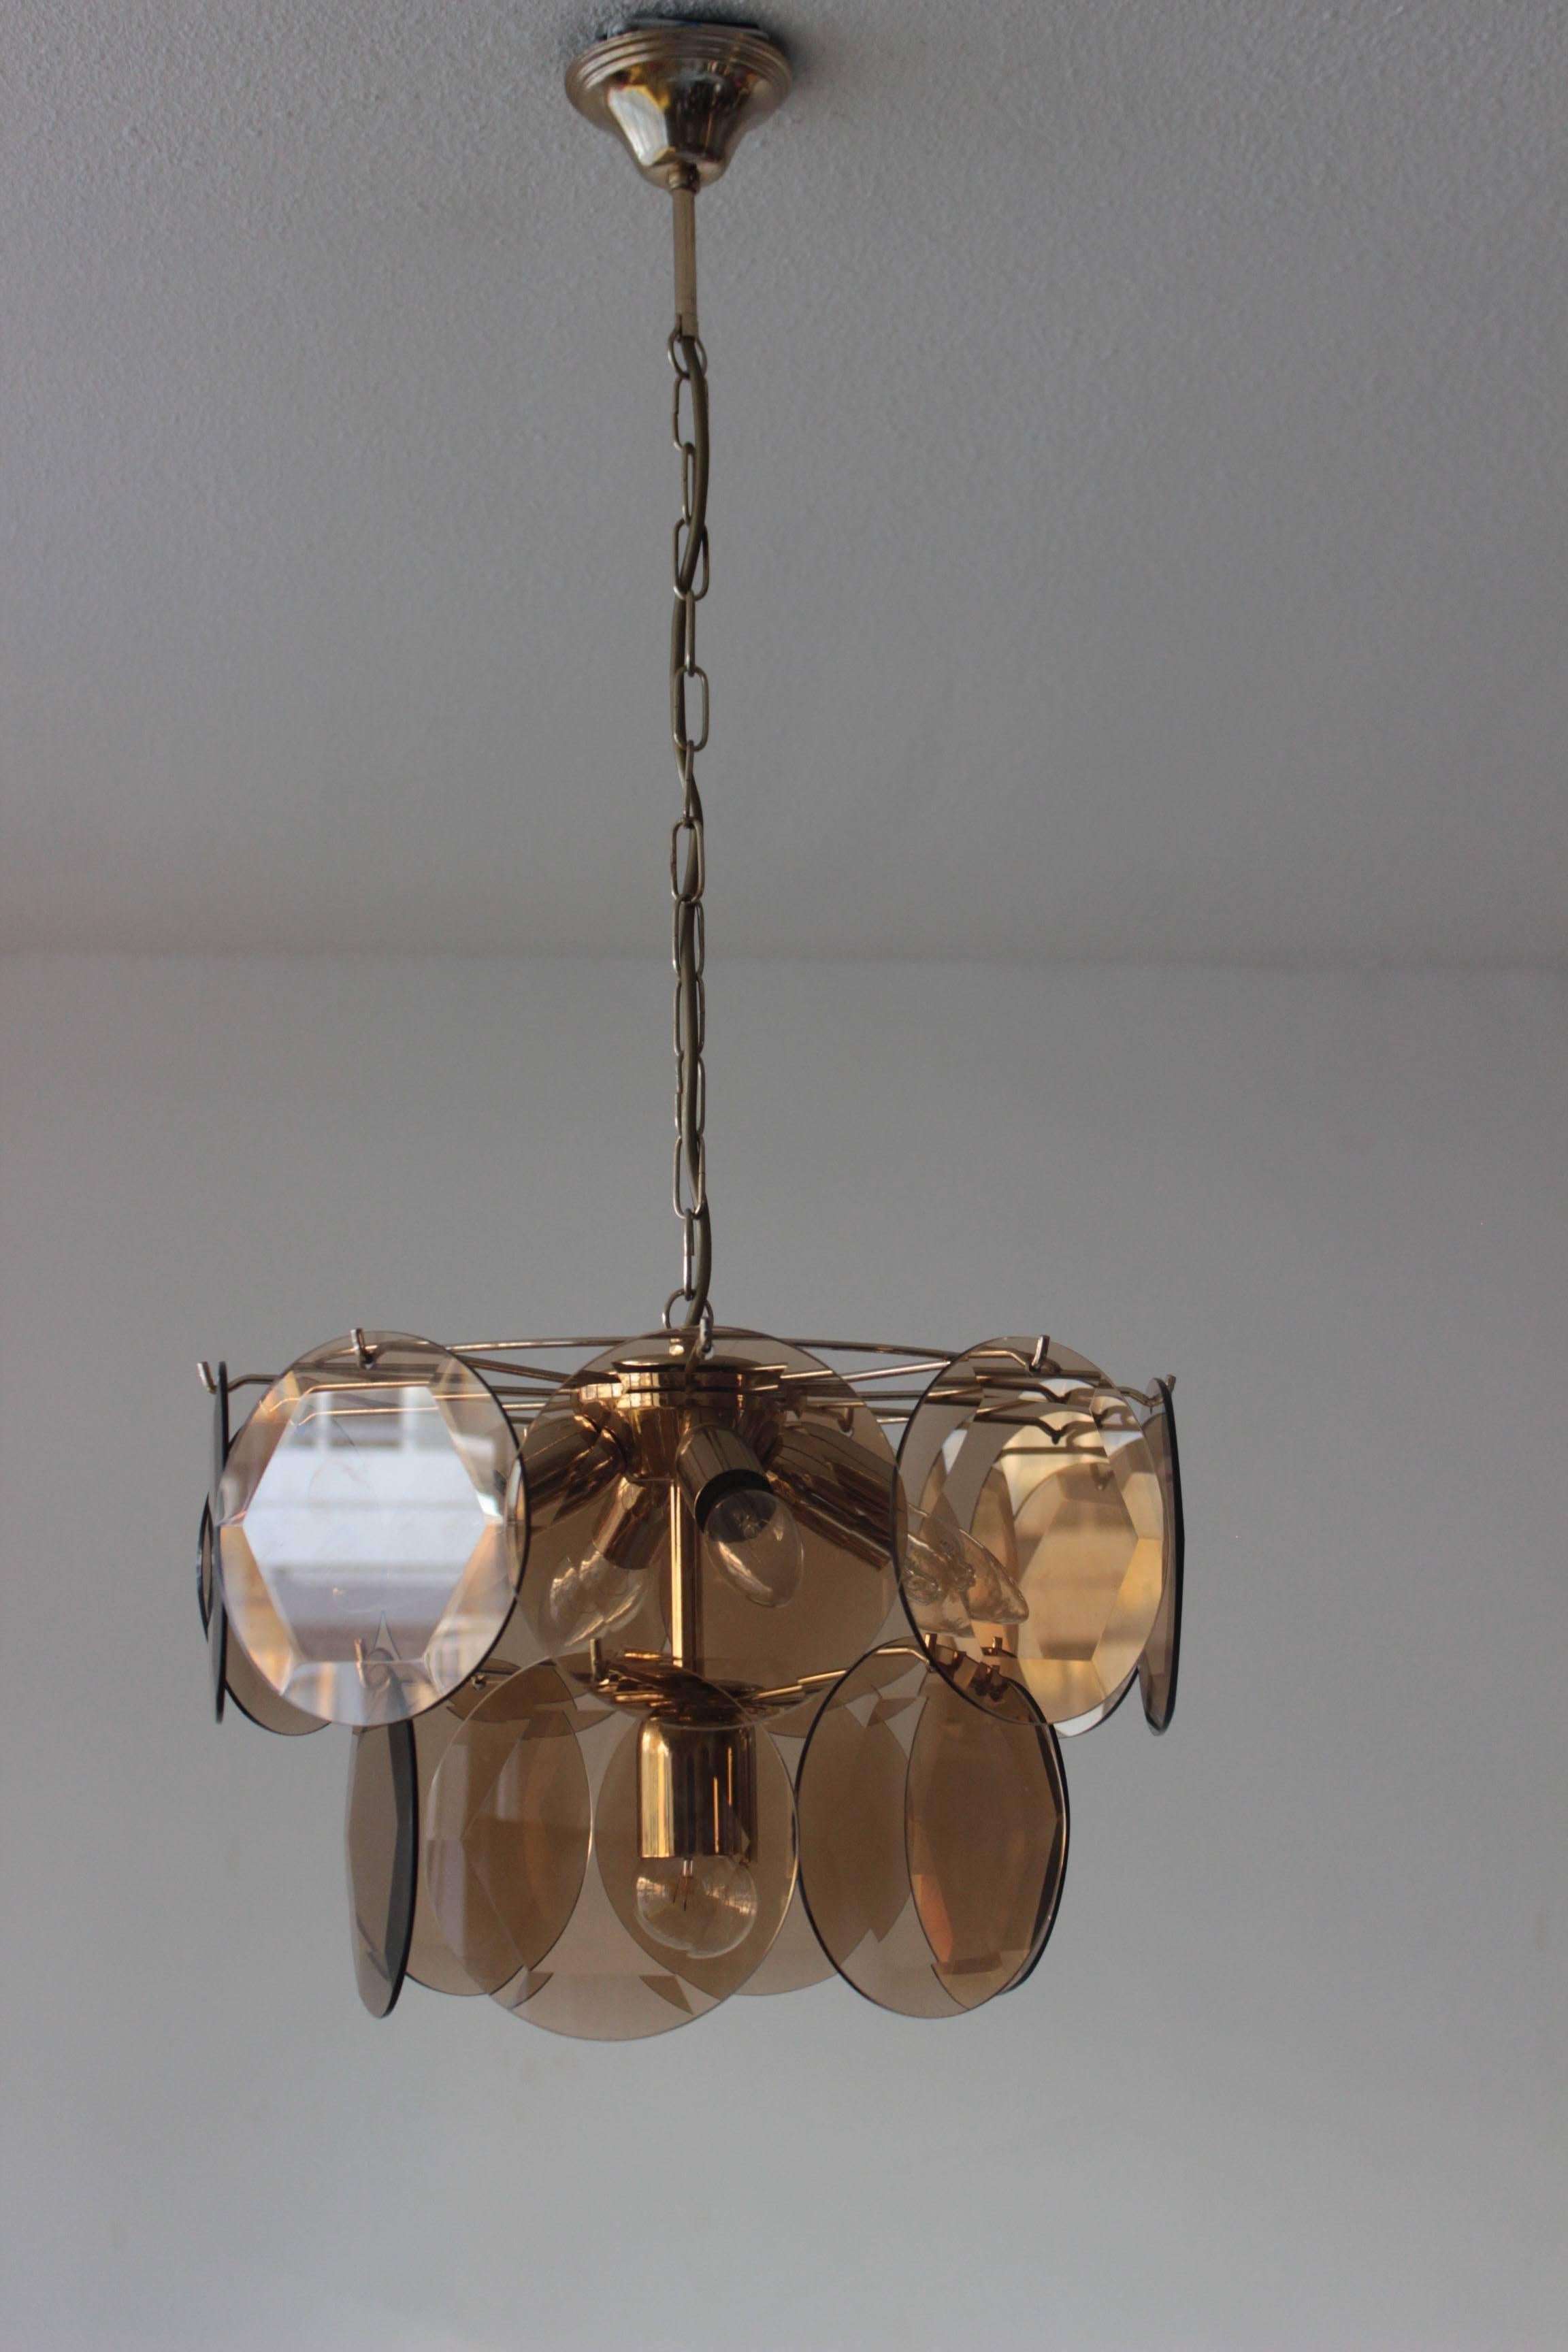 Vistosi smoked glass disc and brass chandelier from Italy, 1970s.

Stunnig Murano chandelier in the style of the Italian designer Gino Vistosi with large disks, each disk has a diamond shape in the middle, five bulbs, two layers and 15 facet